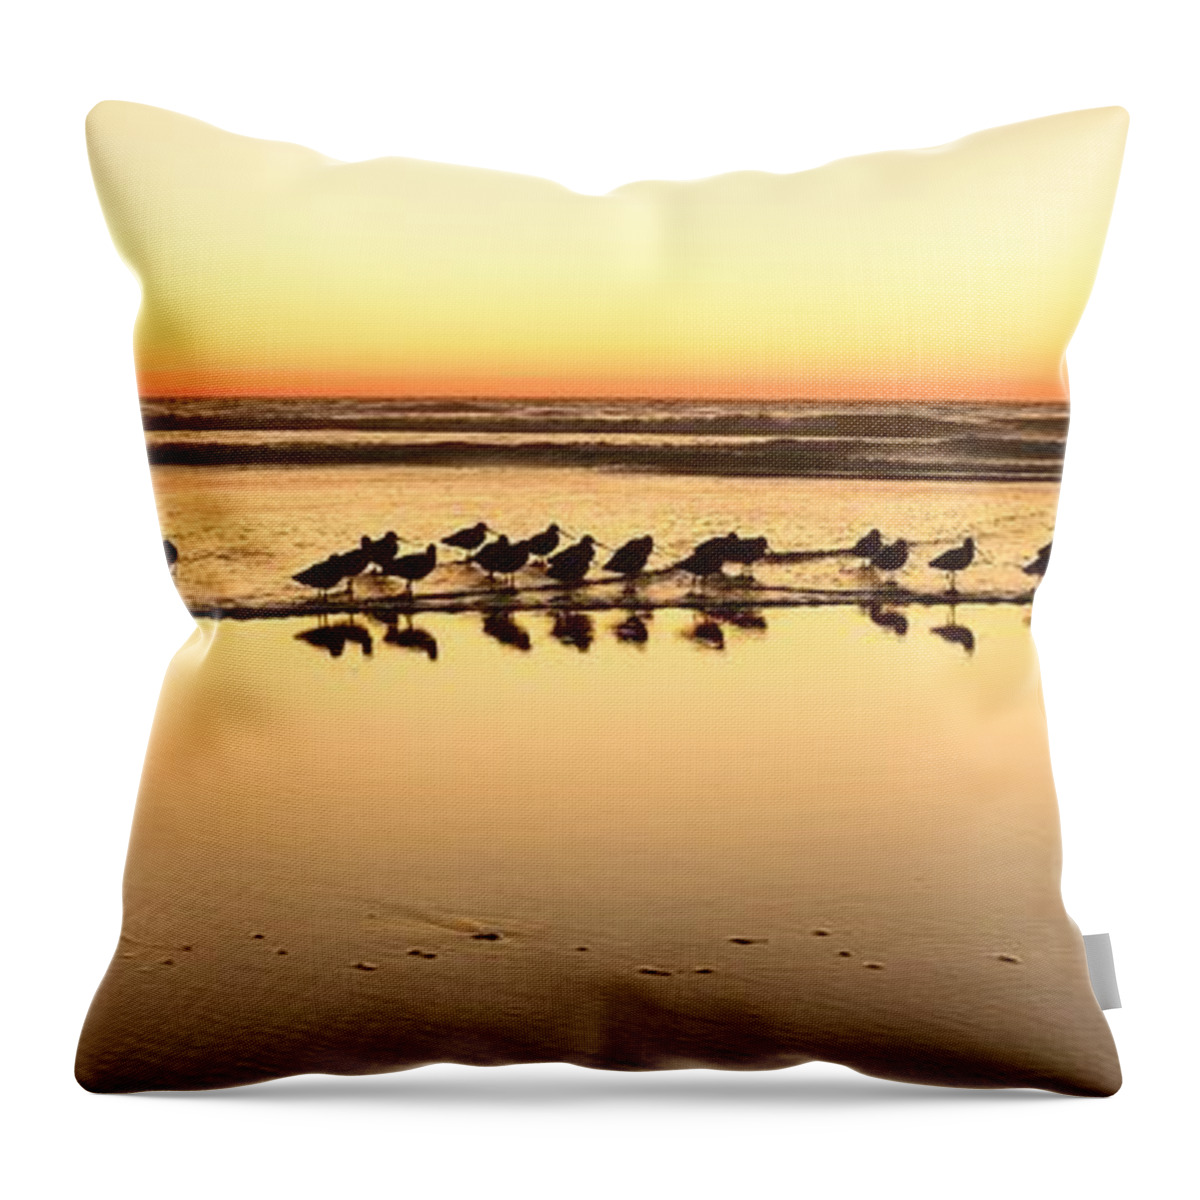 Landscapes Throw Pillow featuring the photograph Wander by John F Tsumas